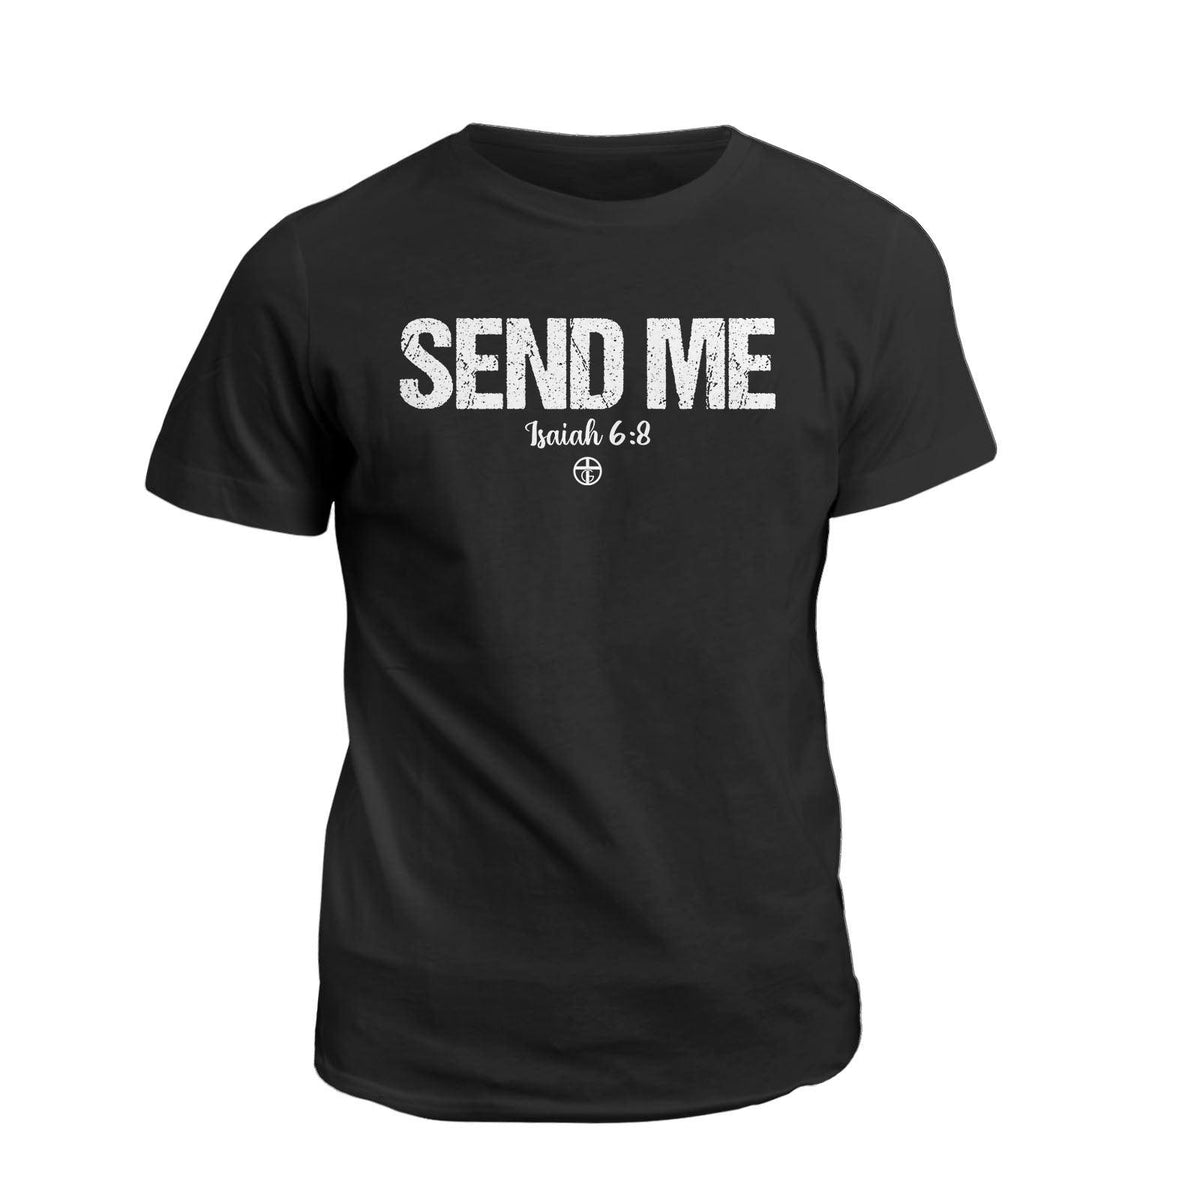 Isaiah 6:8 “SEND ME” (Front and Back)